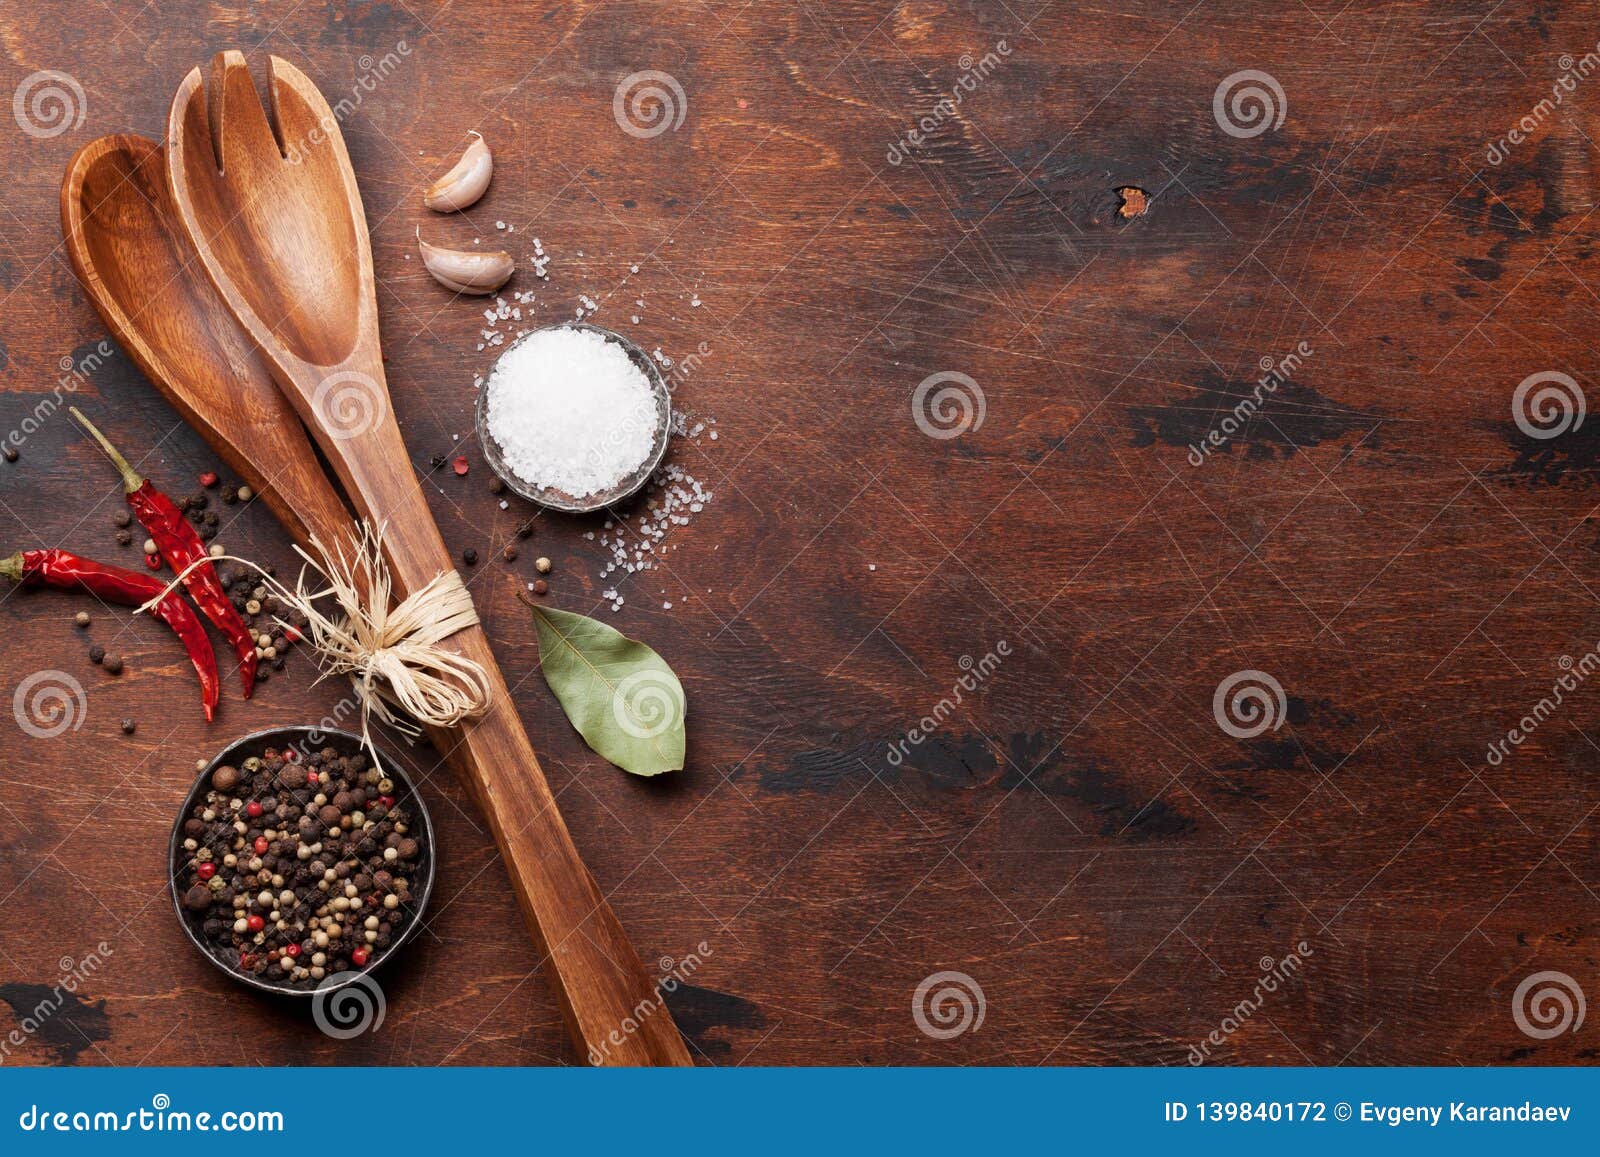 Set of Various Spices and Cooking Utensils Stock Photo - Image of ...